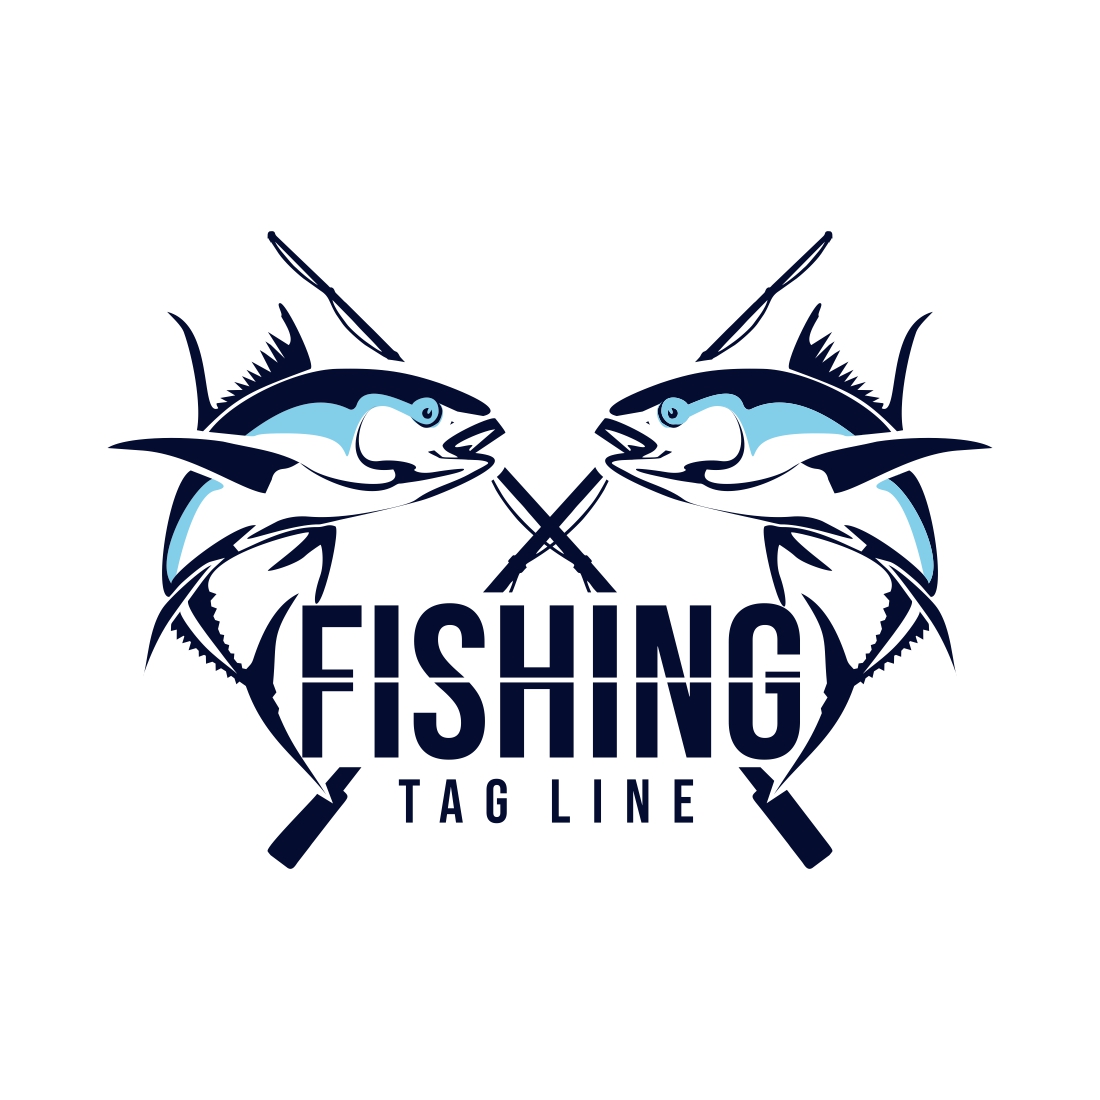 Fishing logo two Bass fish with two fishing rod symbols Fishing theme vector illustration preview image.